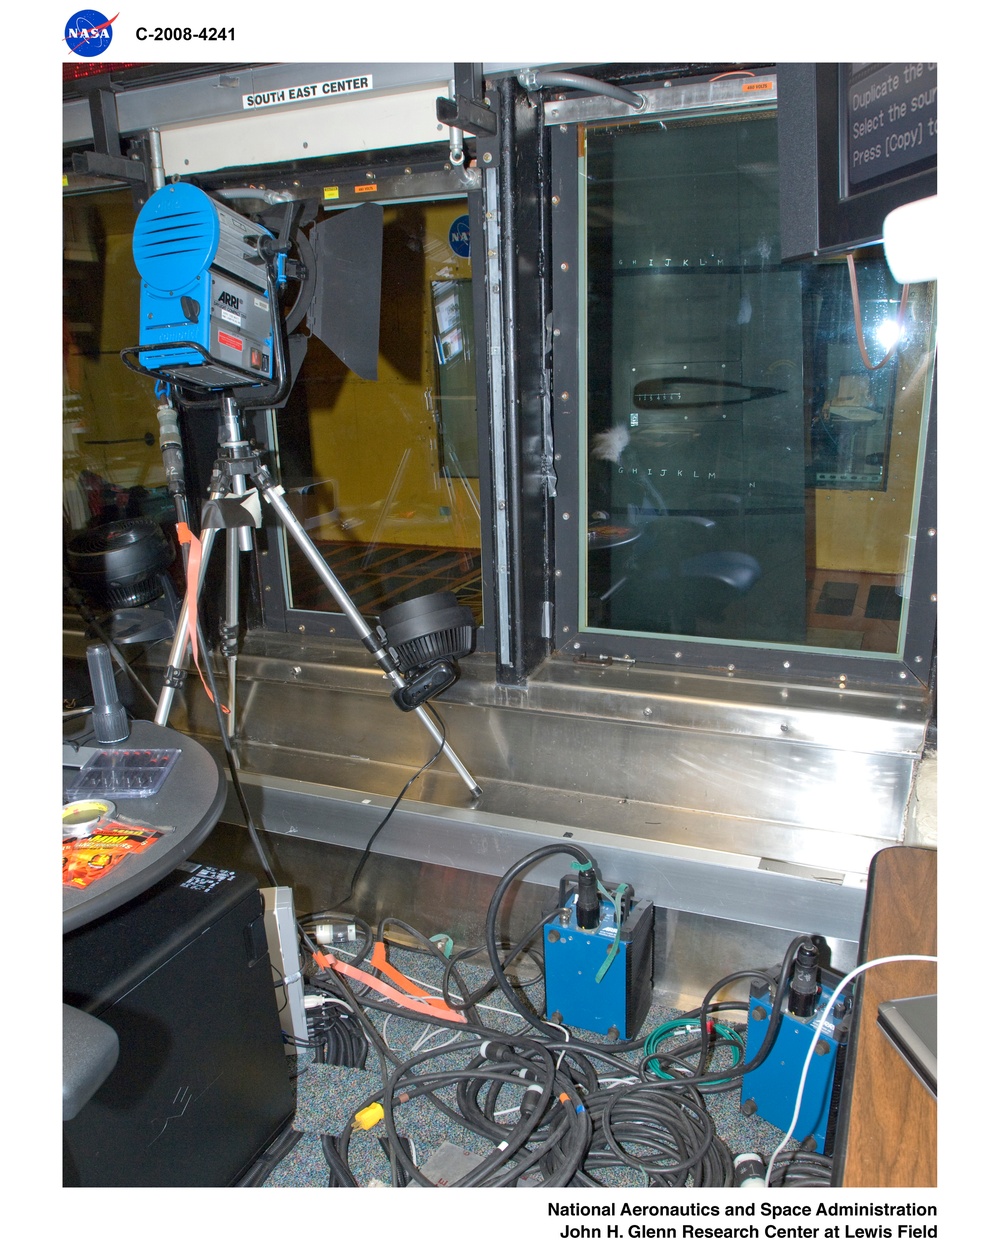 Documentation of the Scientific Imaging set-up for the Predator &quot;B&quot; Wing Electro-Expulsive De-Icing System (EEDS) Test